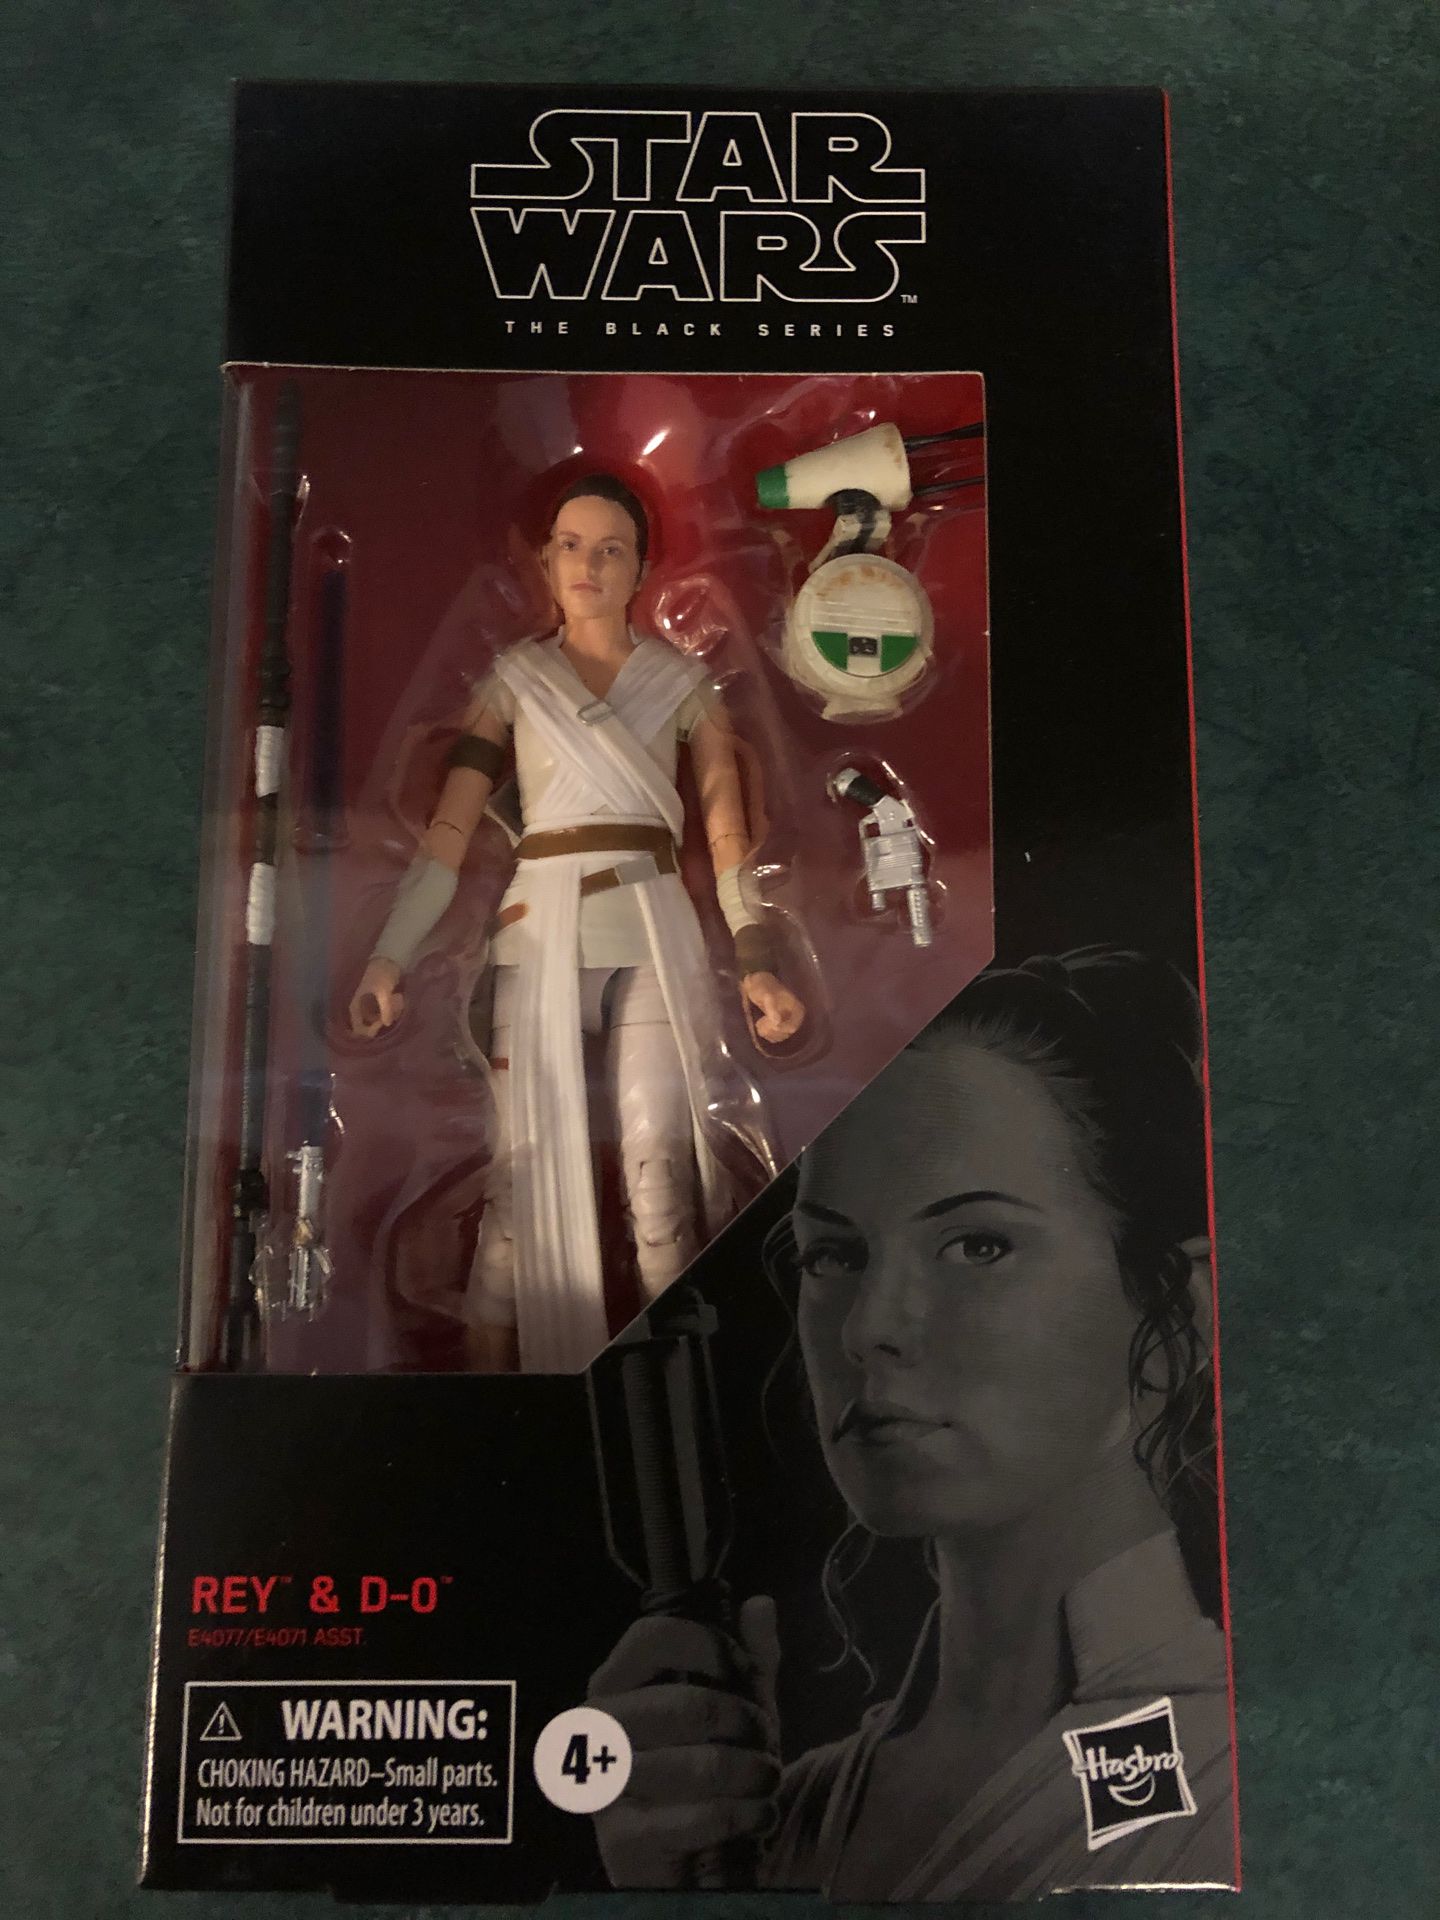 Star Wars The Black Series Rey & D-O Action Figure